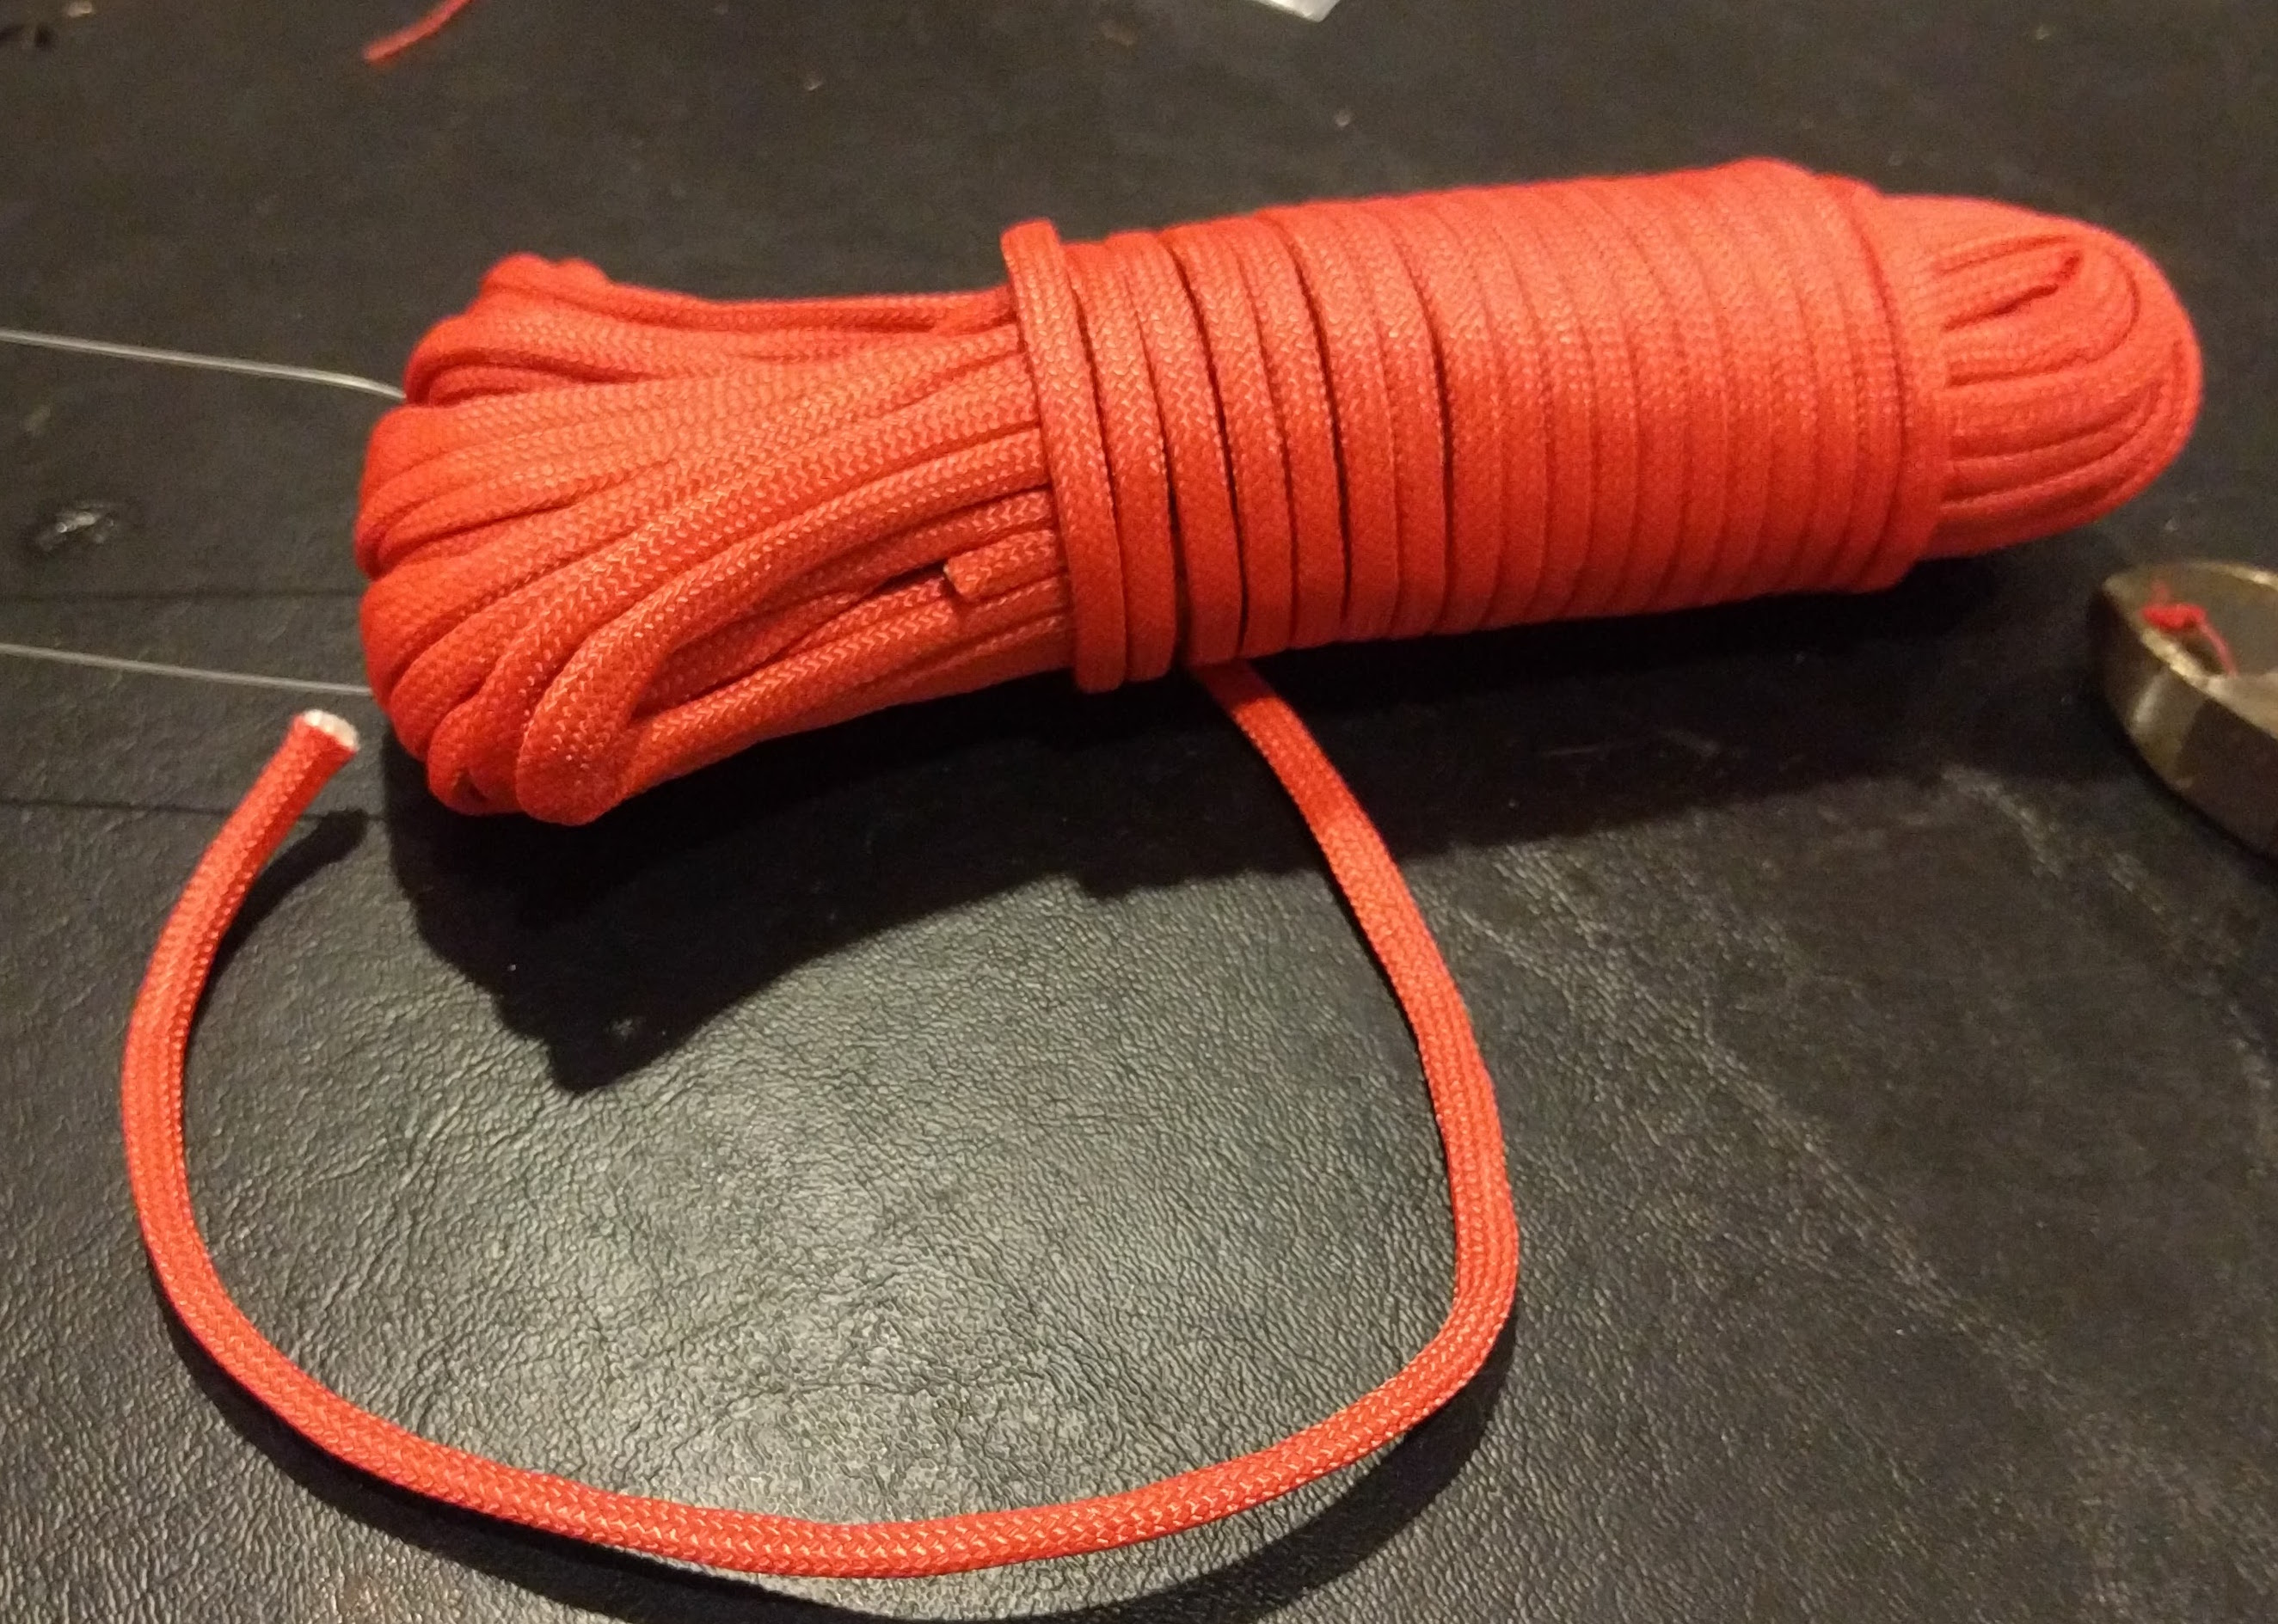 This is parachute cord.